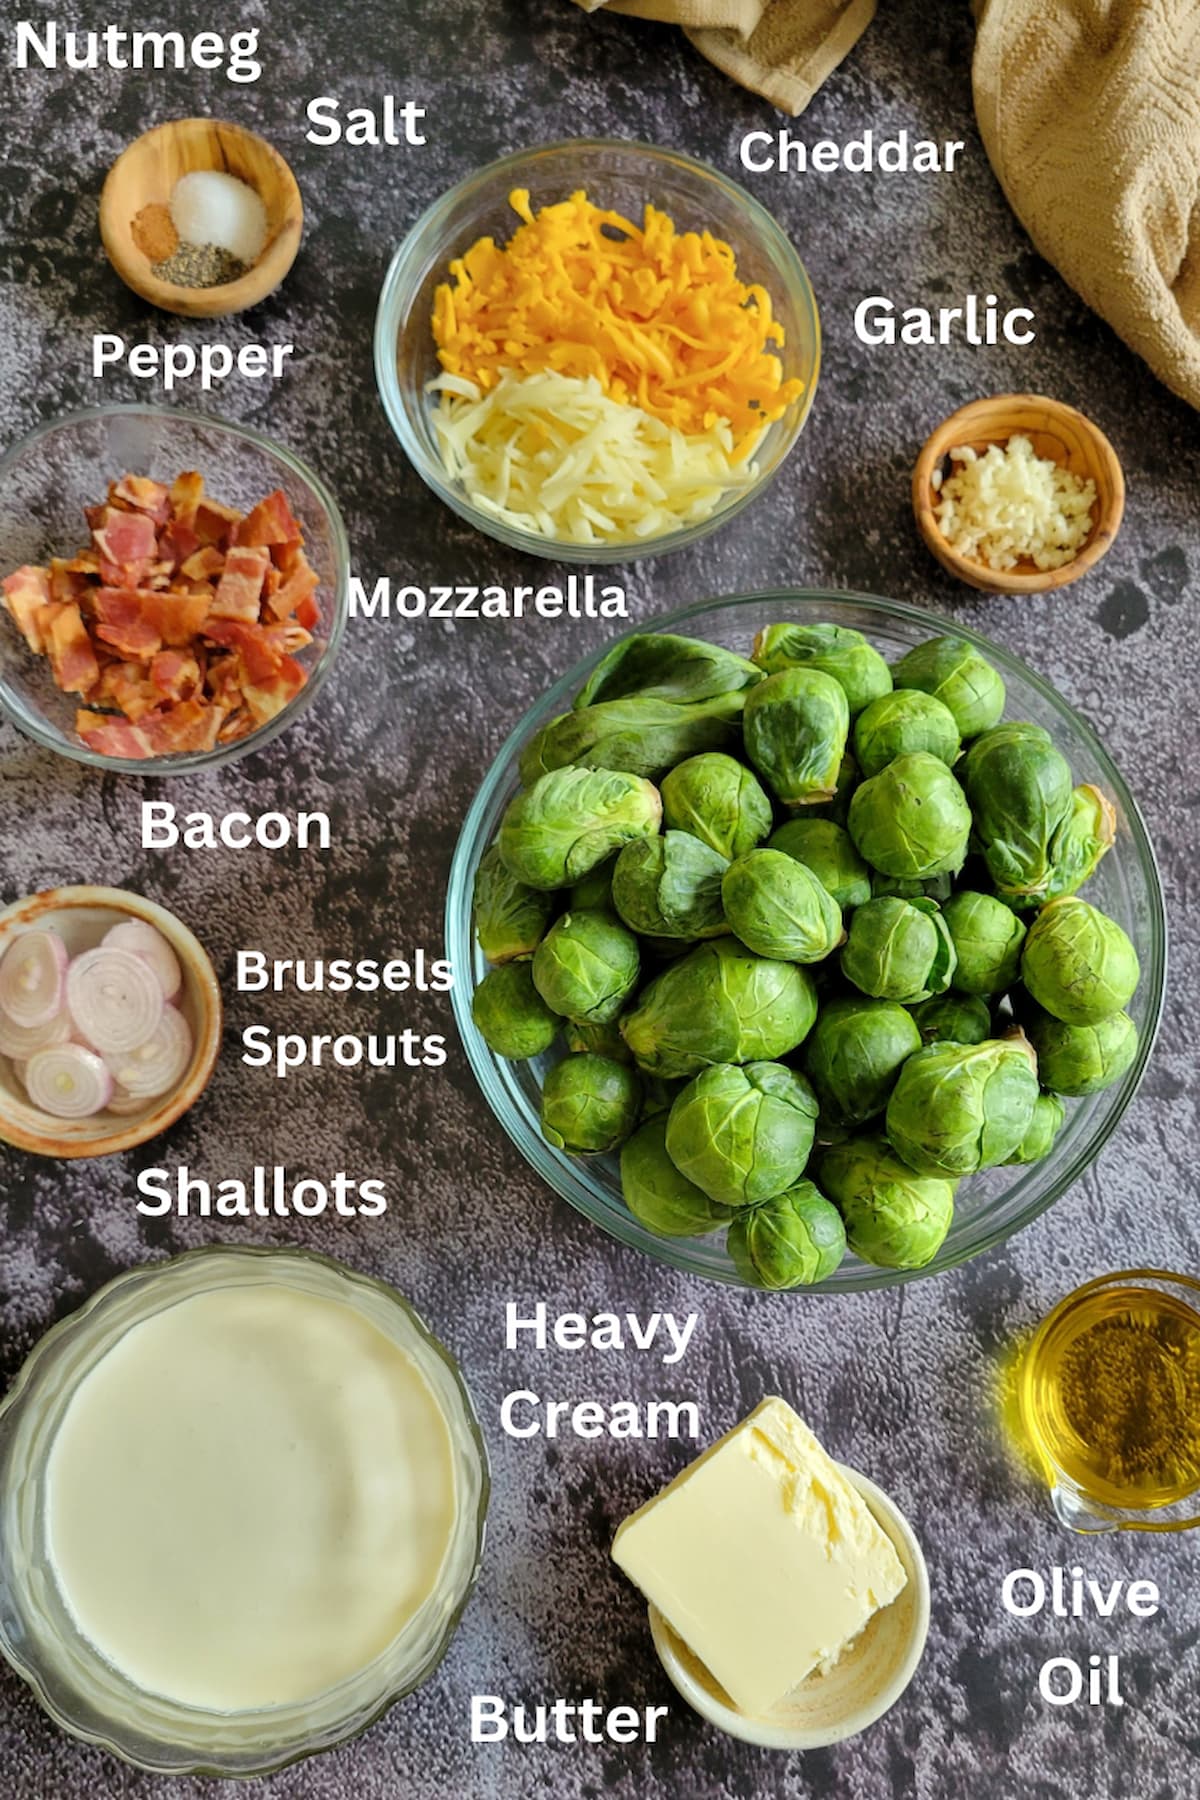 ingredients for brussels sprouts in cream - heavy cream, butter, olive oil, salt, pepper, nutmeg, mozzarella, cheddar, garlic, bacon, shallots, brussels sprouts